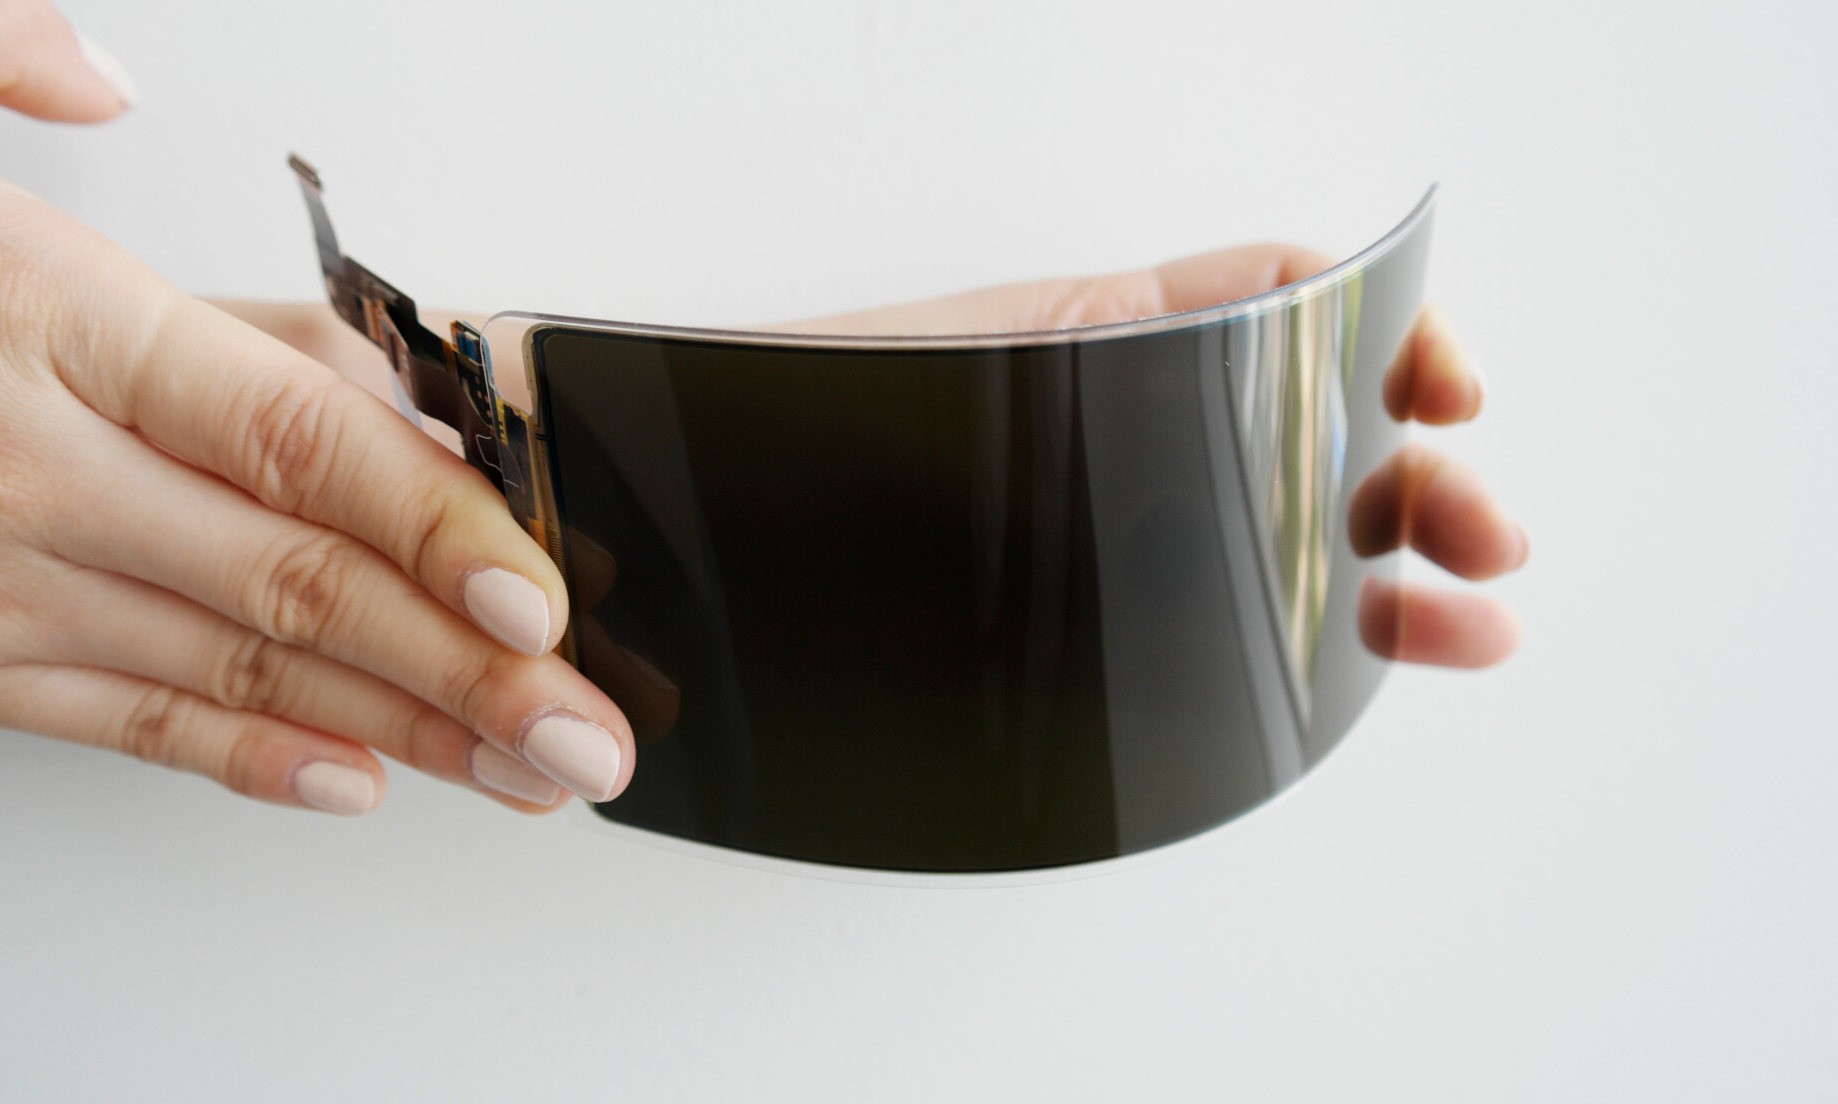 Samsung Display has created what it claims to be an unbreakable flexible OLED panel for smartphones